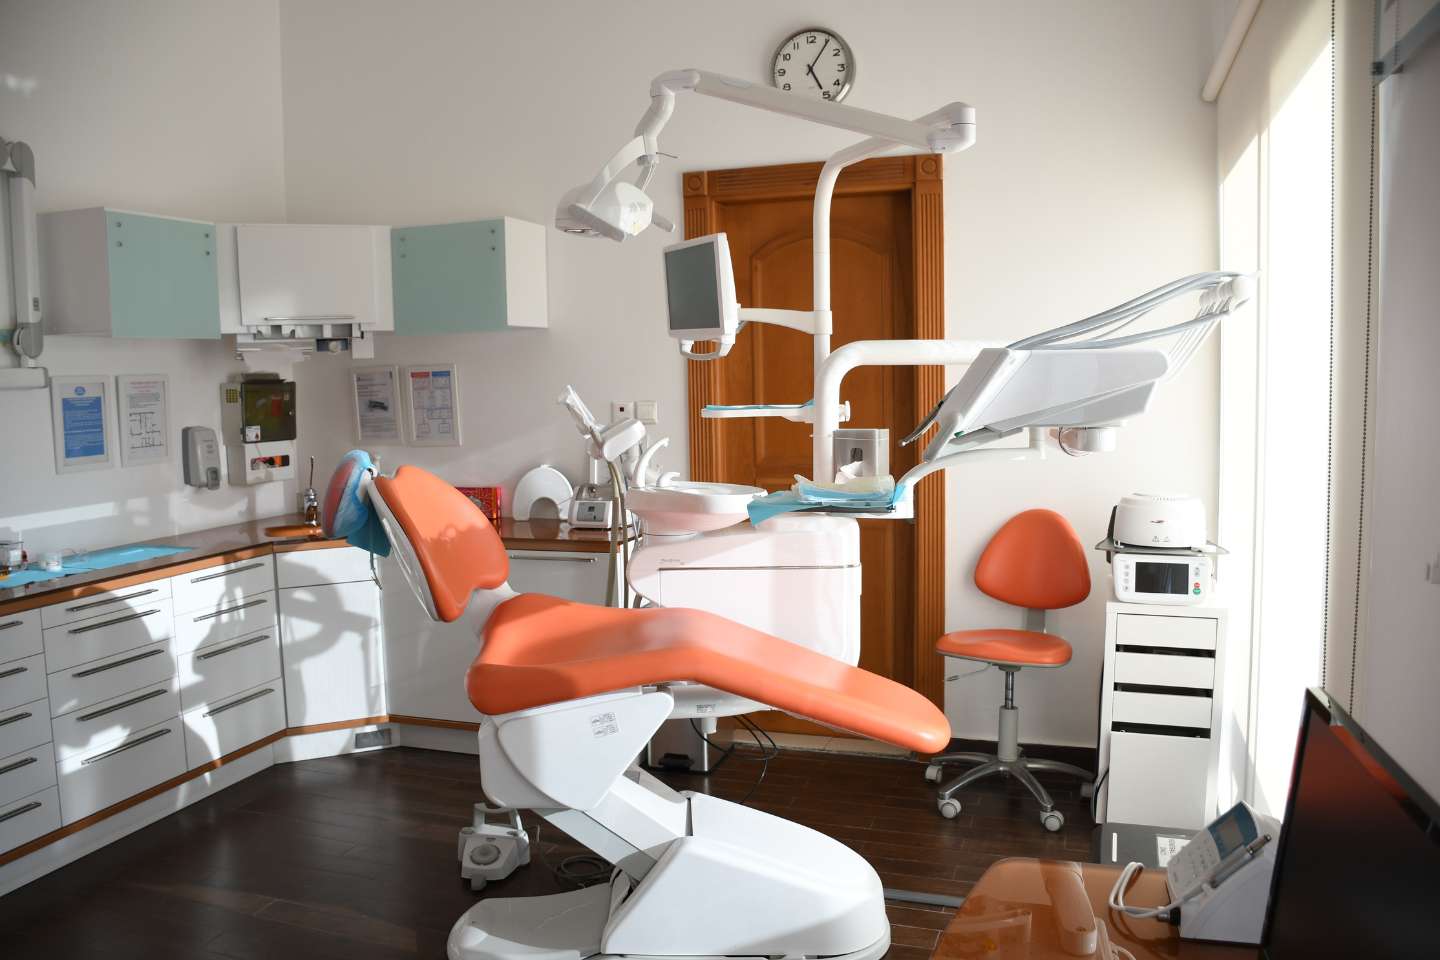 A typical dental surgery, white cabinets line the back and side walls, with a large orange bed-chair in the middle of the room. Small orange chair in the corner with large dental equipment above the chair.